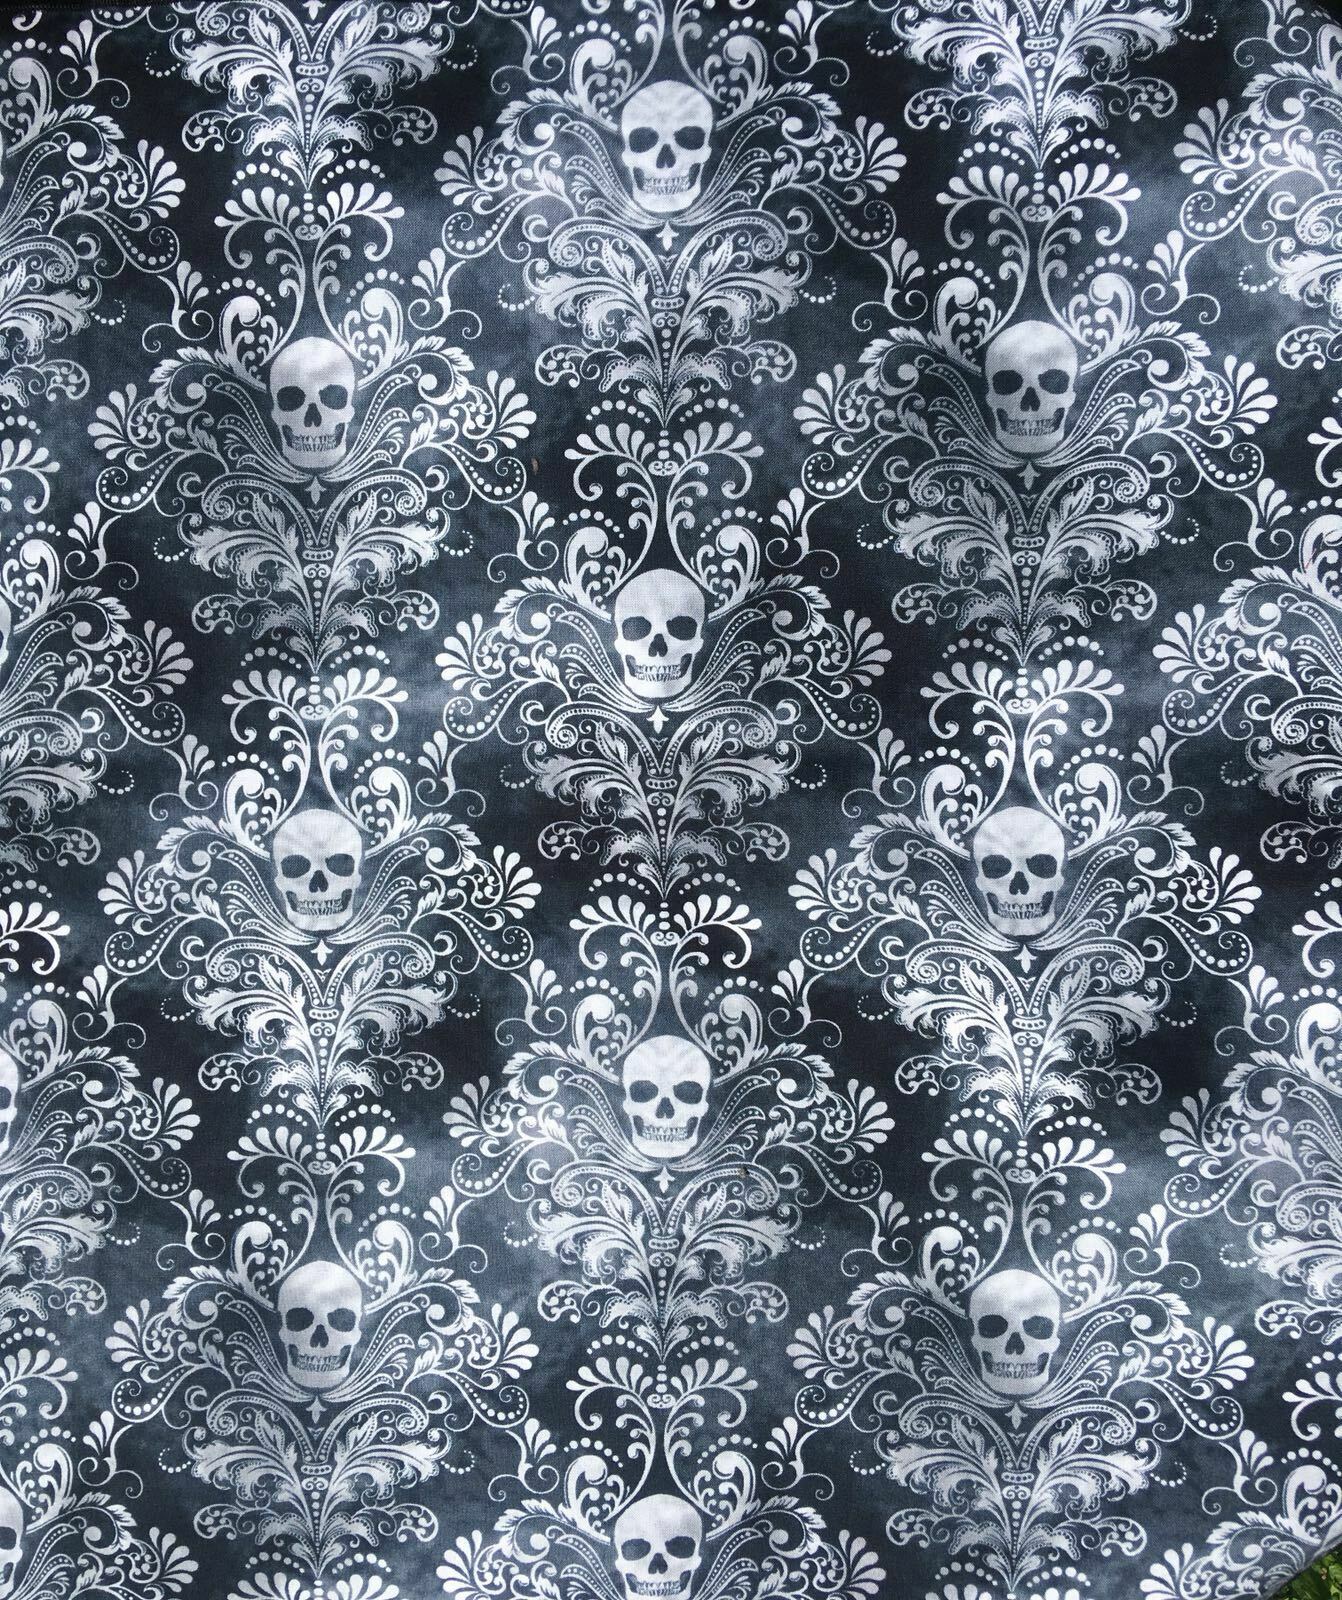 Gothic Filigree Skull Timeless Treasures 100% Cotton Fabric Ideal For Face Masks